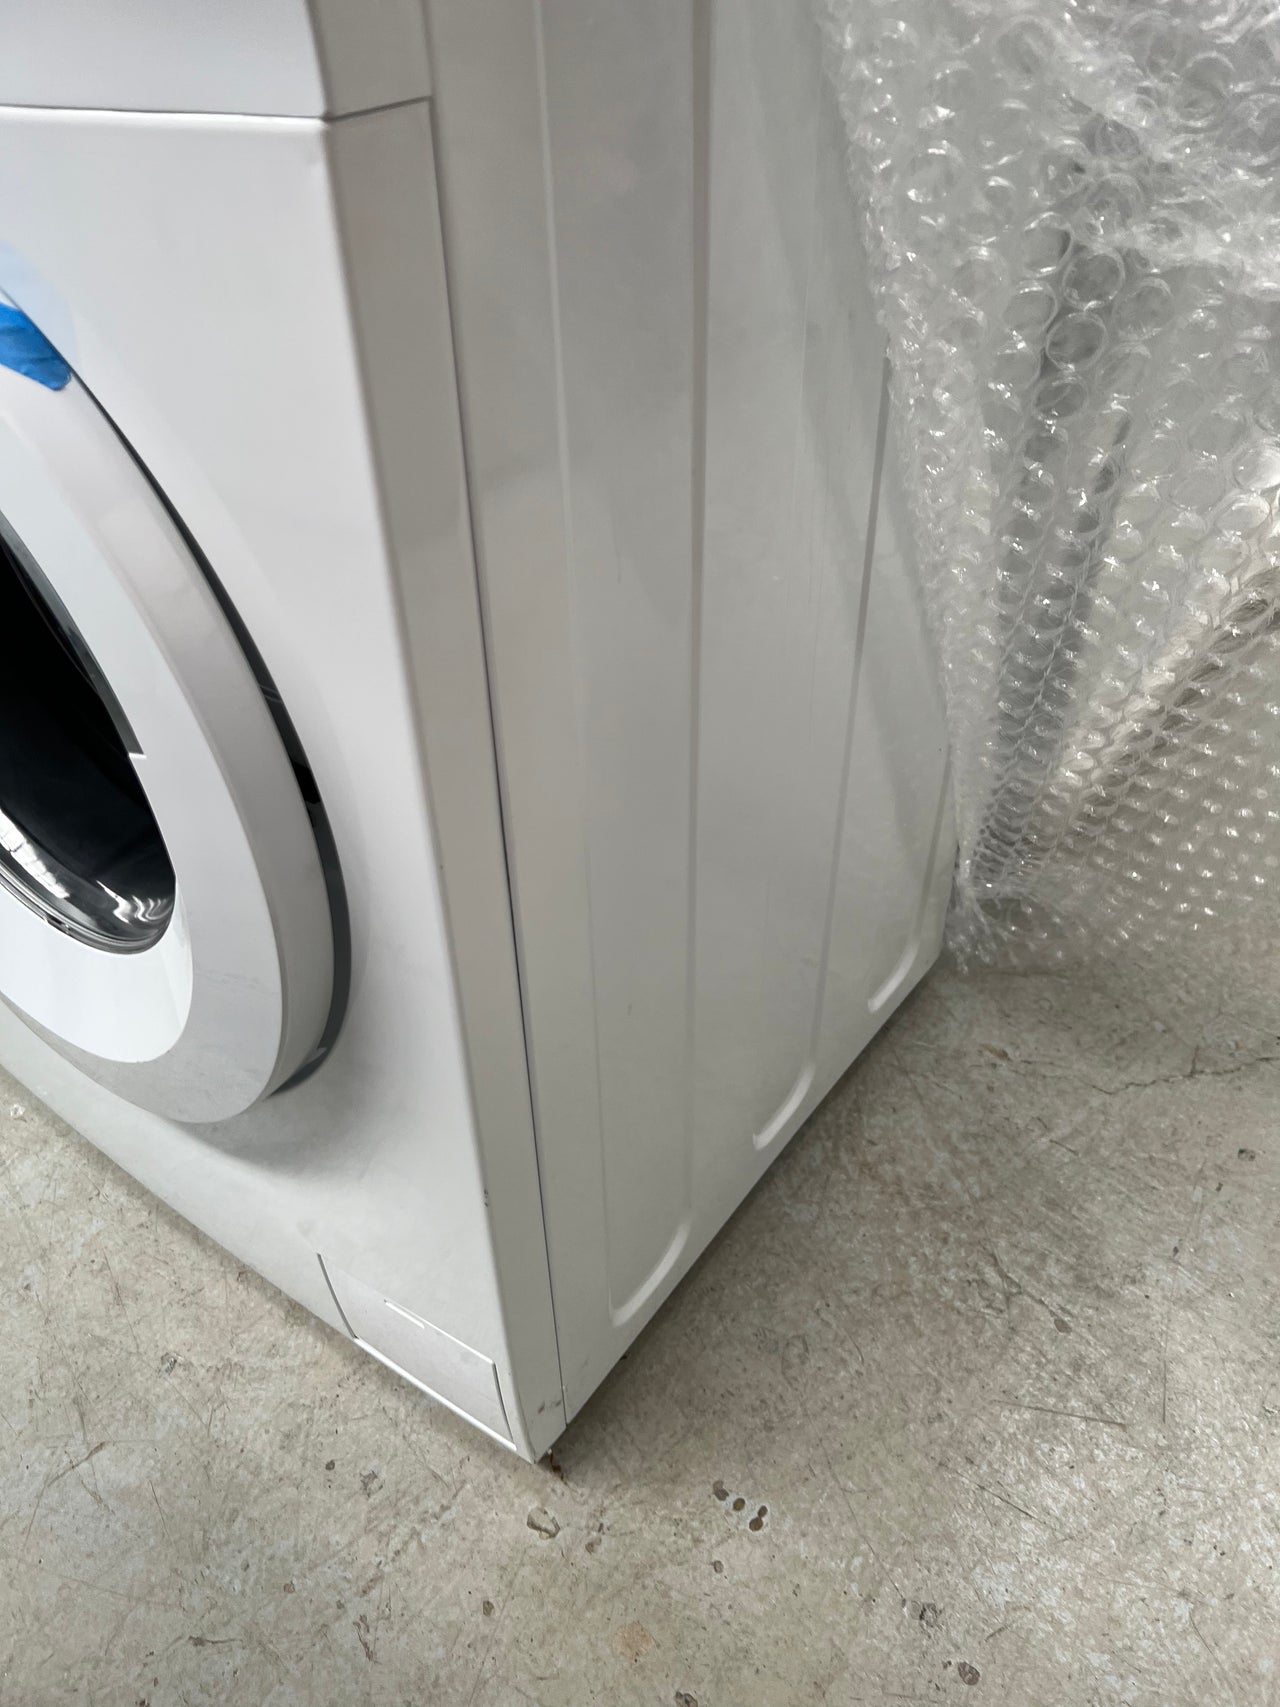 Factory second Haier HWF75AW1 7.5 kg Front Load Washing Machine - Second Hand Appliances Geebung